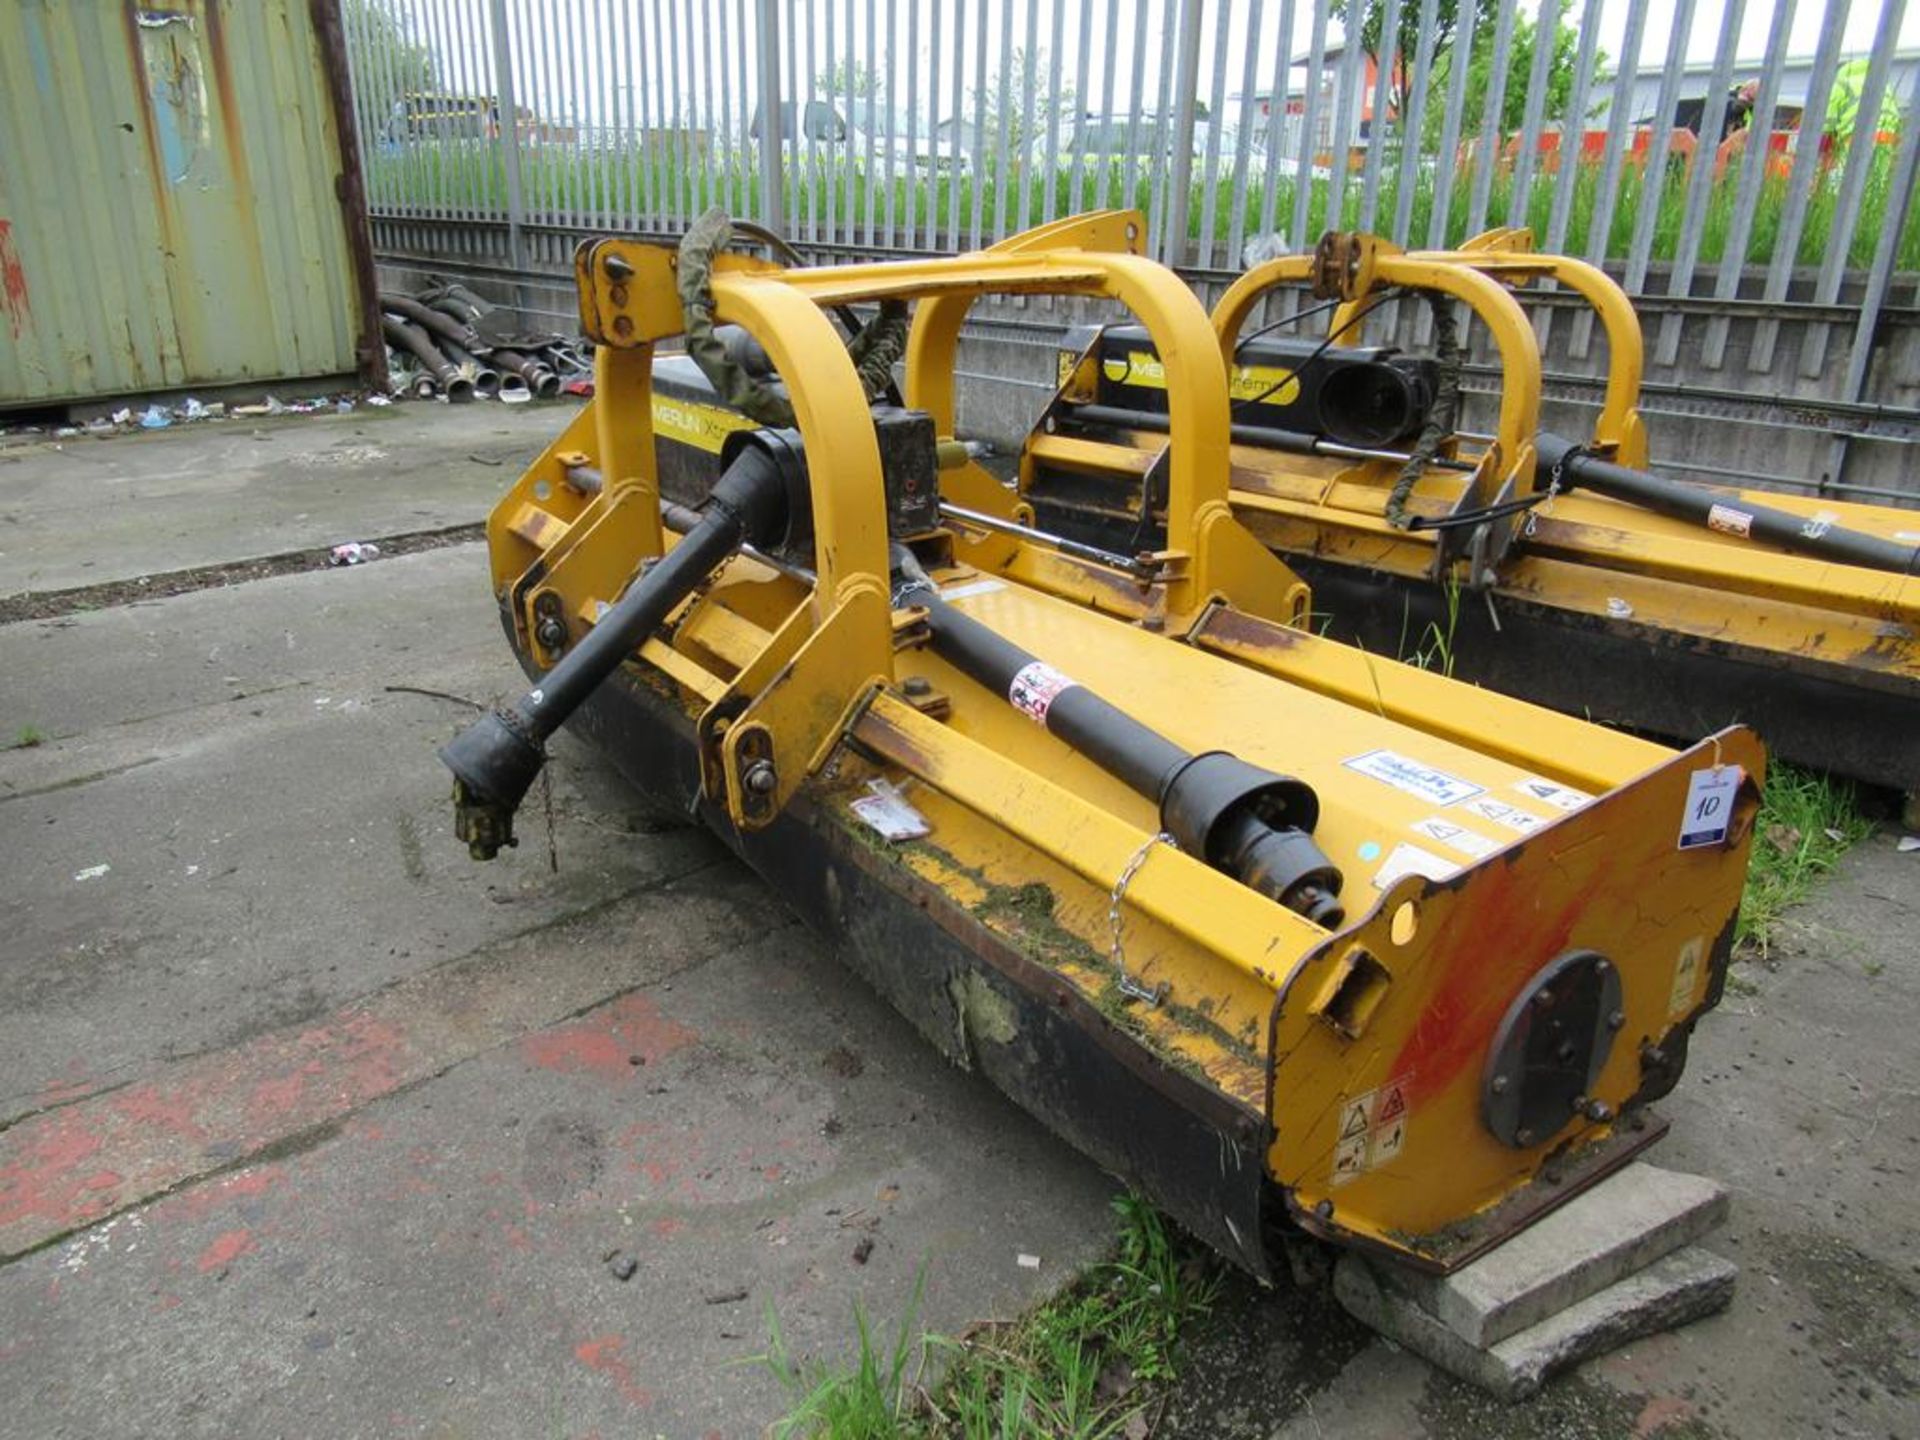 McConnel Merlin Xtreme 2500 Flail Mower